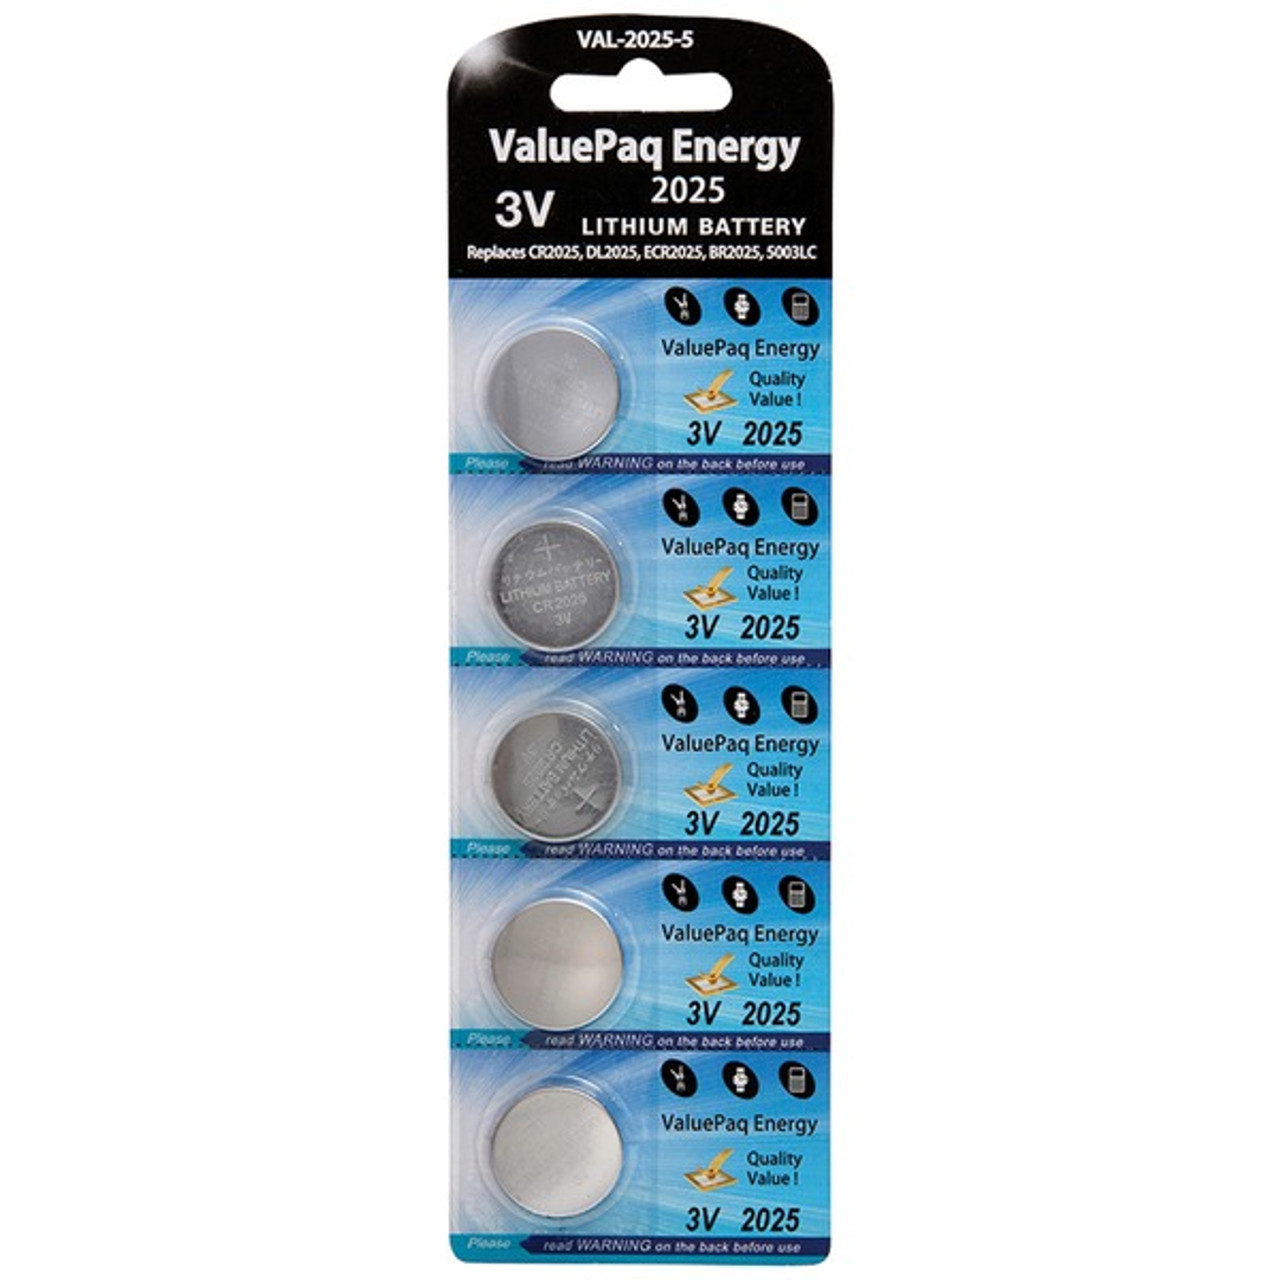 ValuePaq Energy 2025 Lithium Coin Cell Batteries (5 Pack)